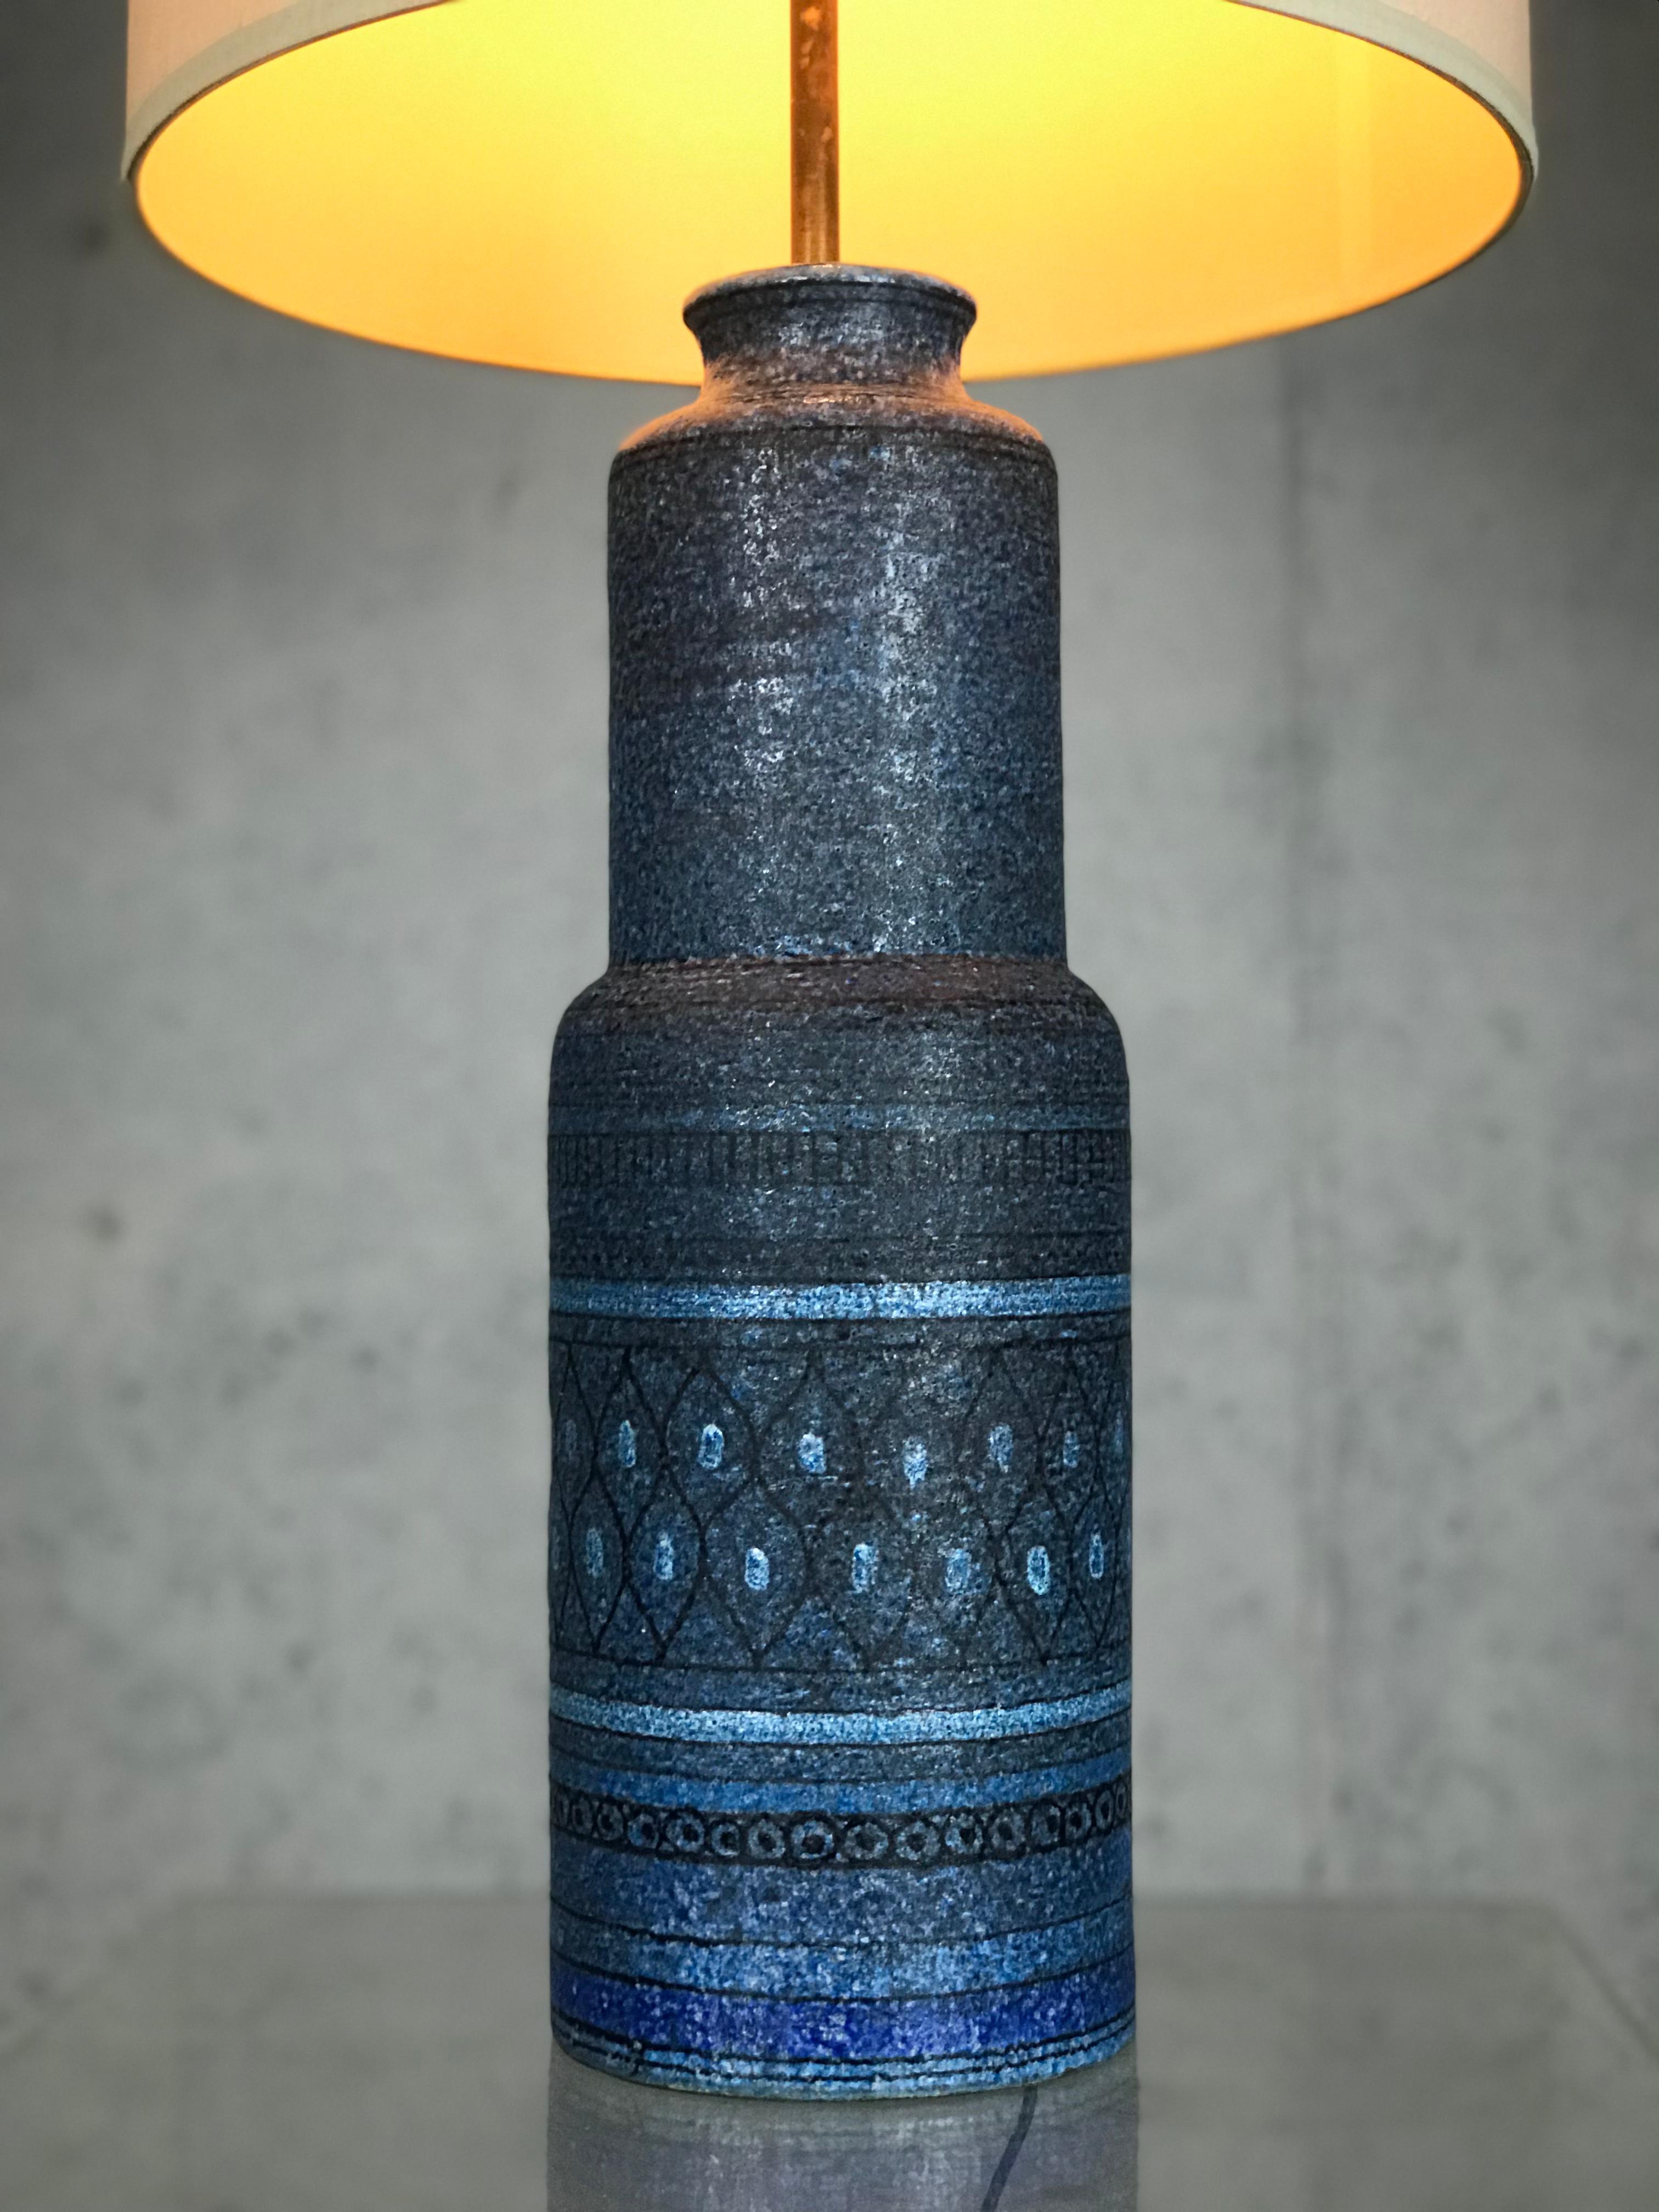 Huge and colorful 1960s Italian ceramic lamp by Bitossi for Raymor. Very nice vintage condition.
Shade not included
Measures:
29